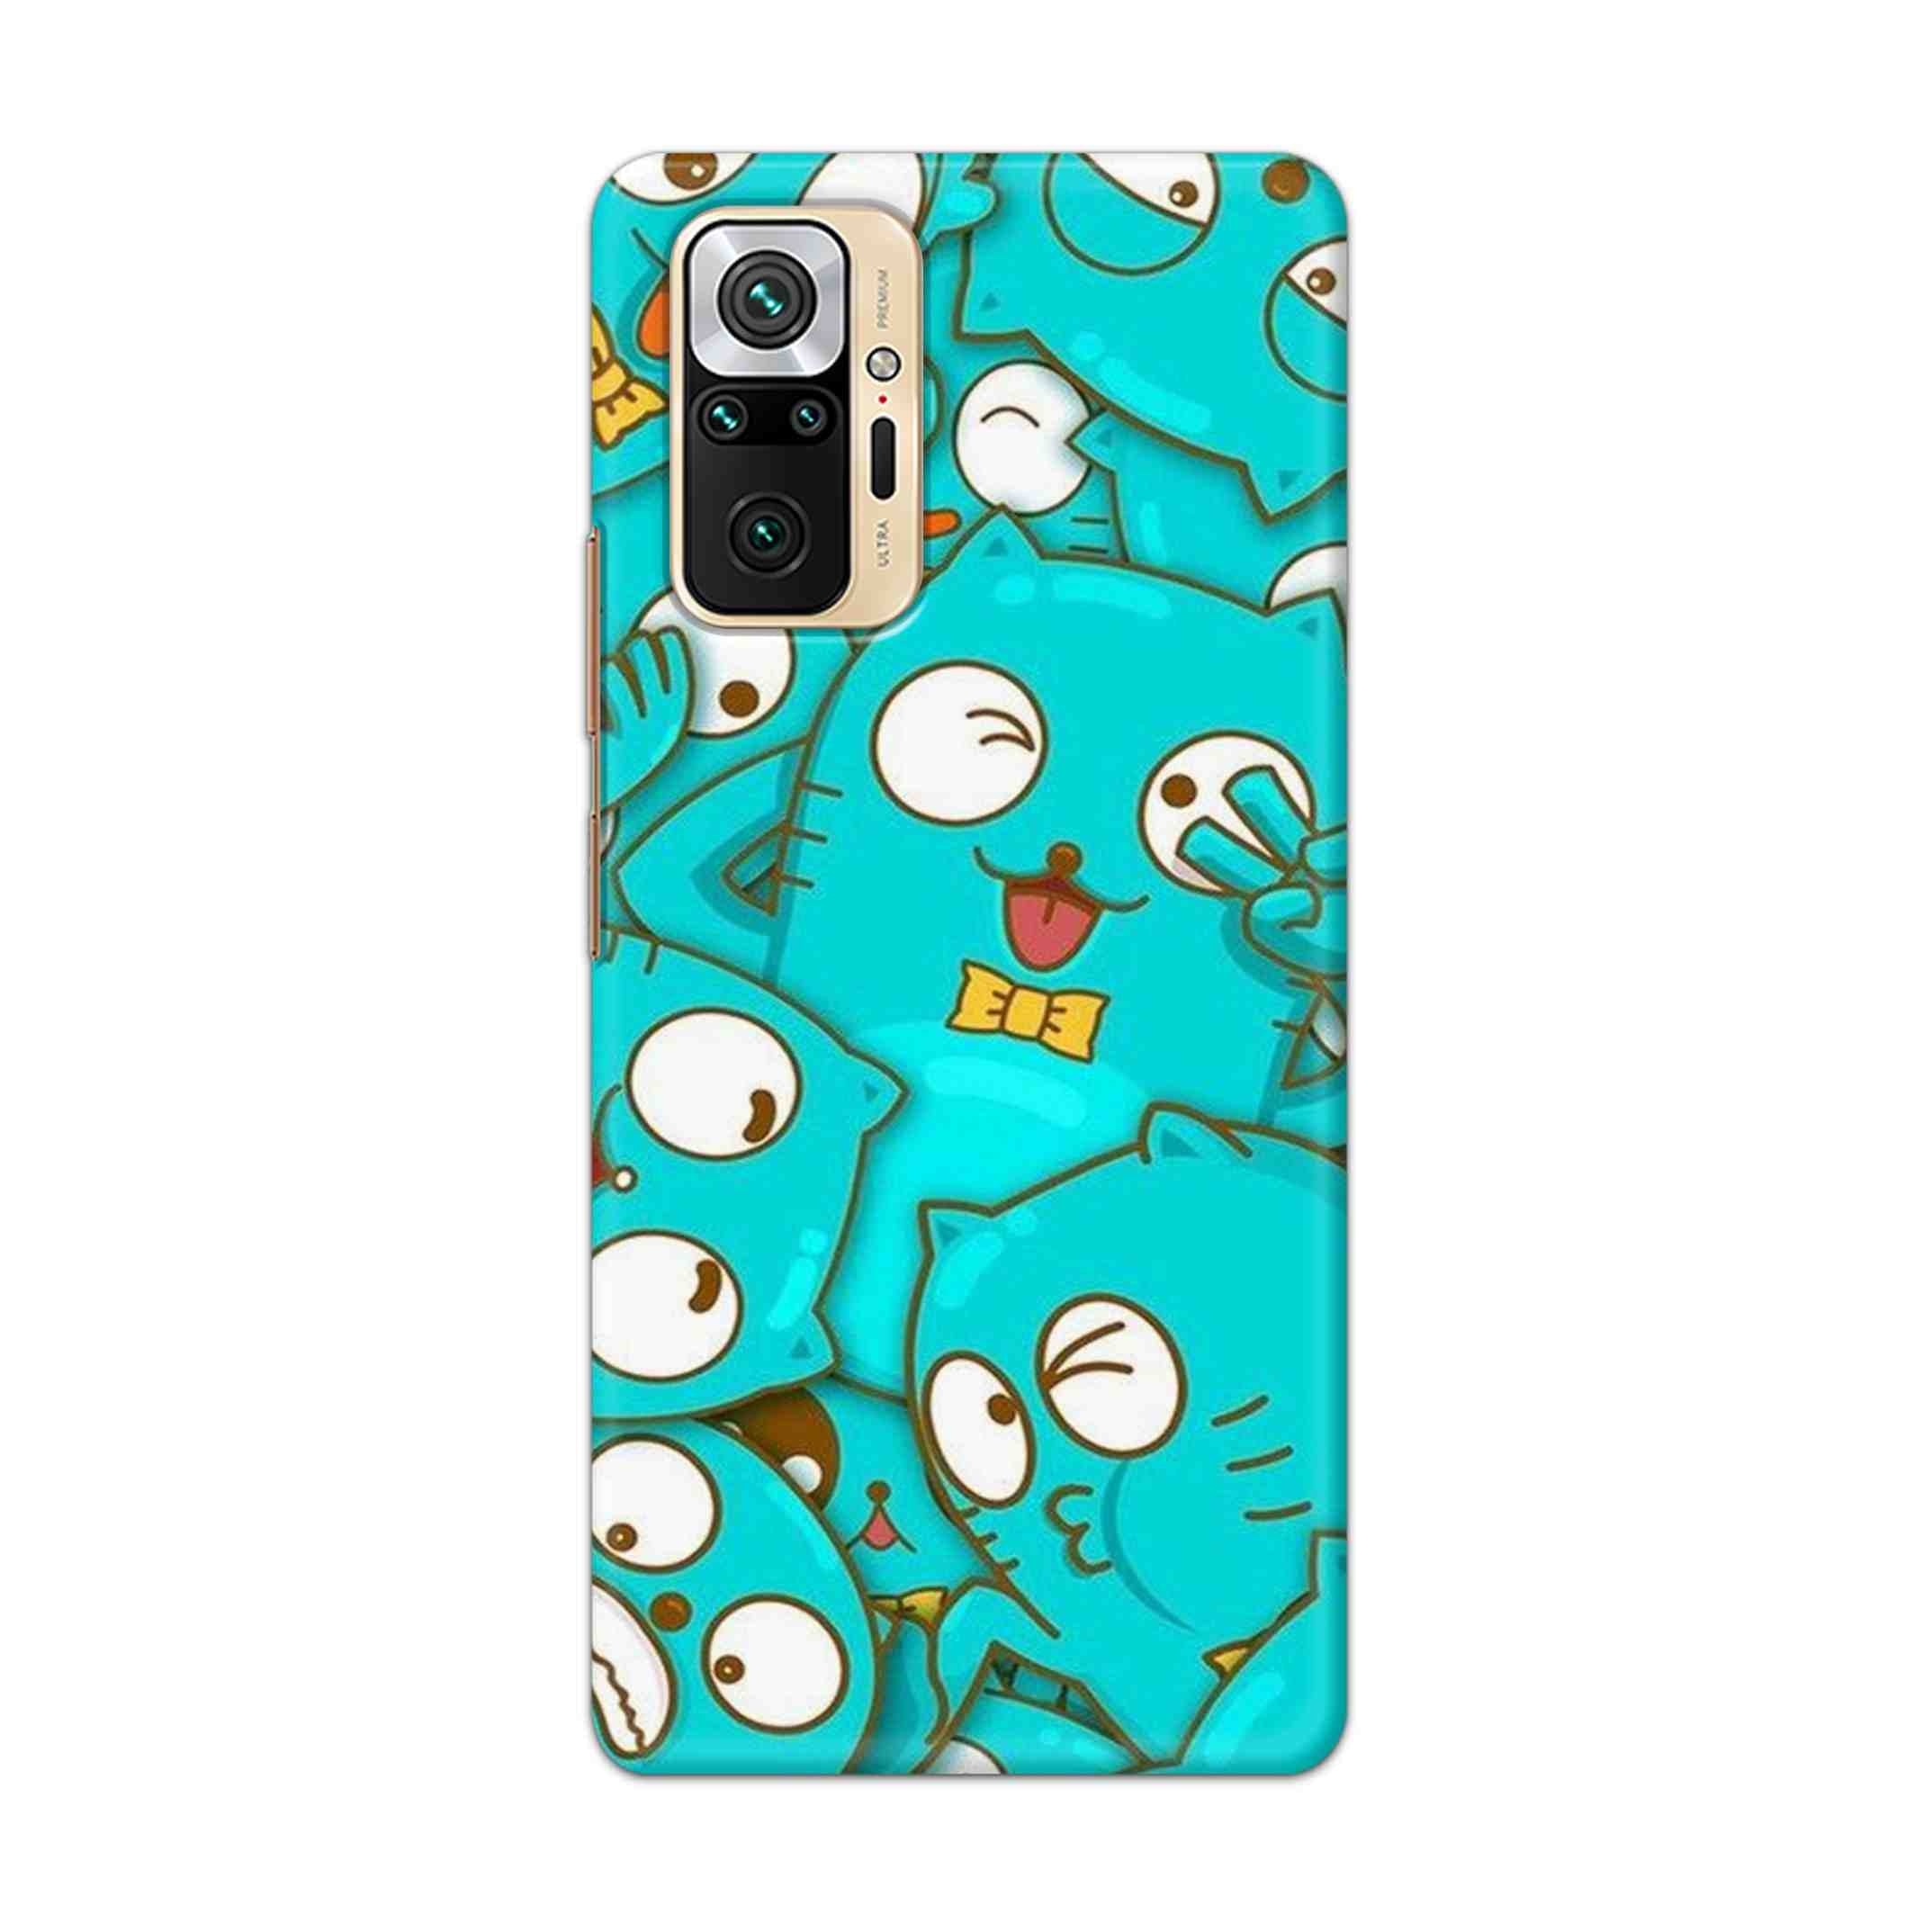 Buy Cat Hard Back Mobile Phone Case Cover For Redmi Note 10 Pro Online